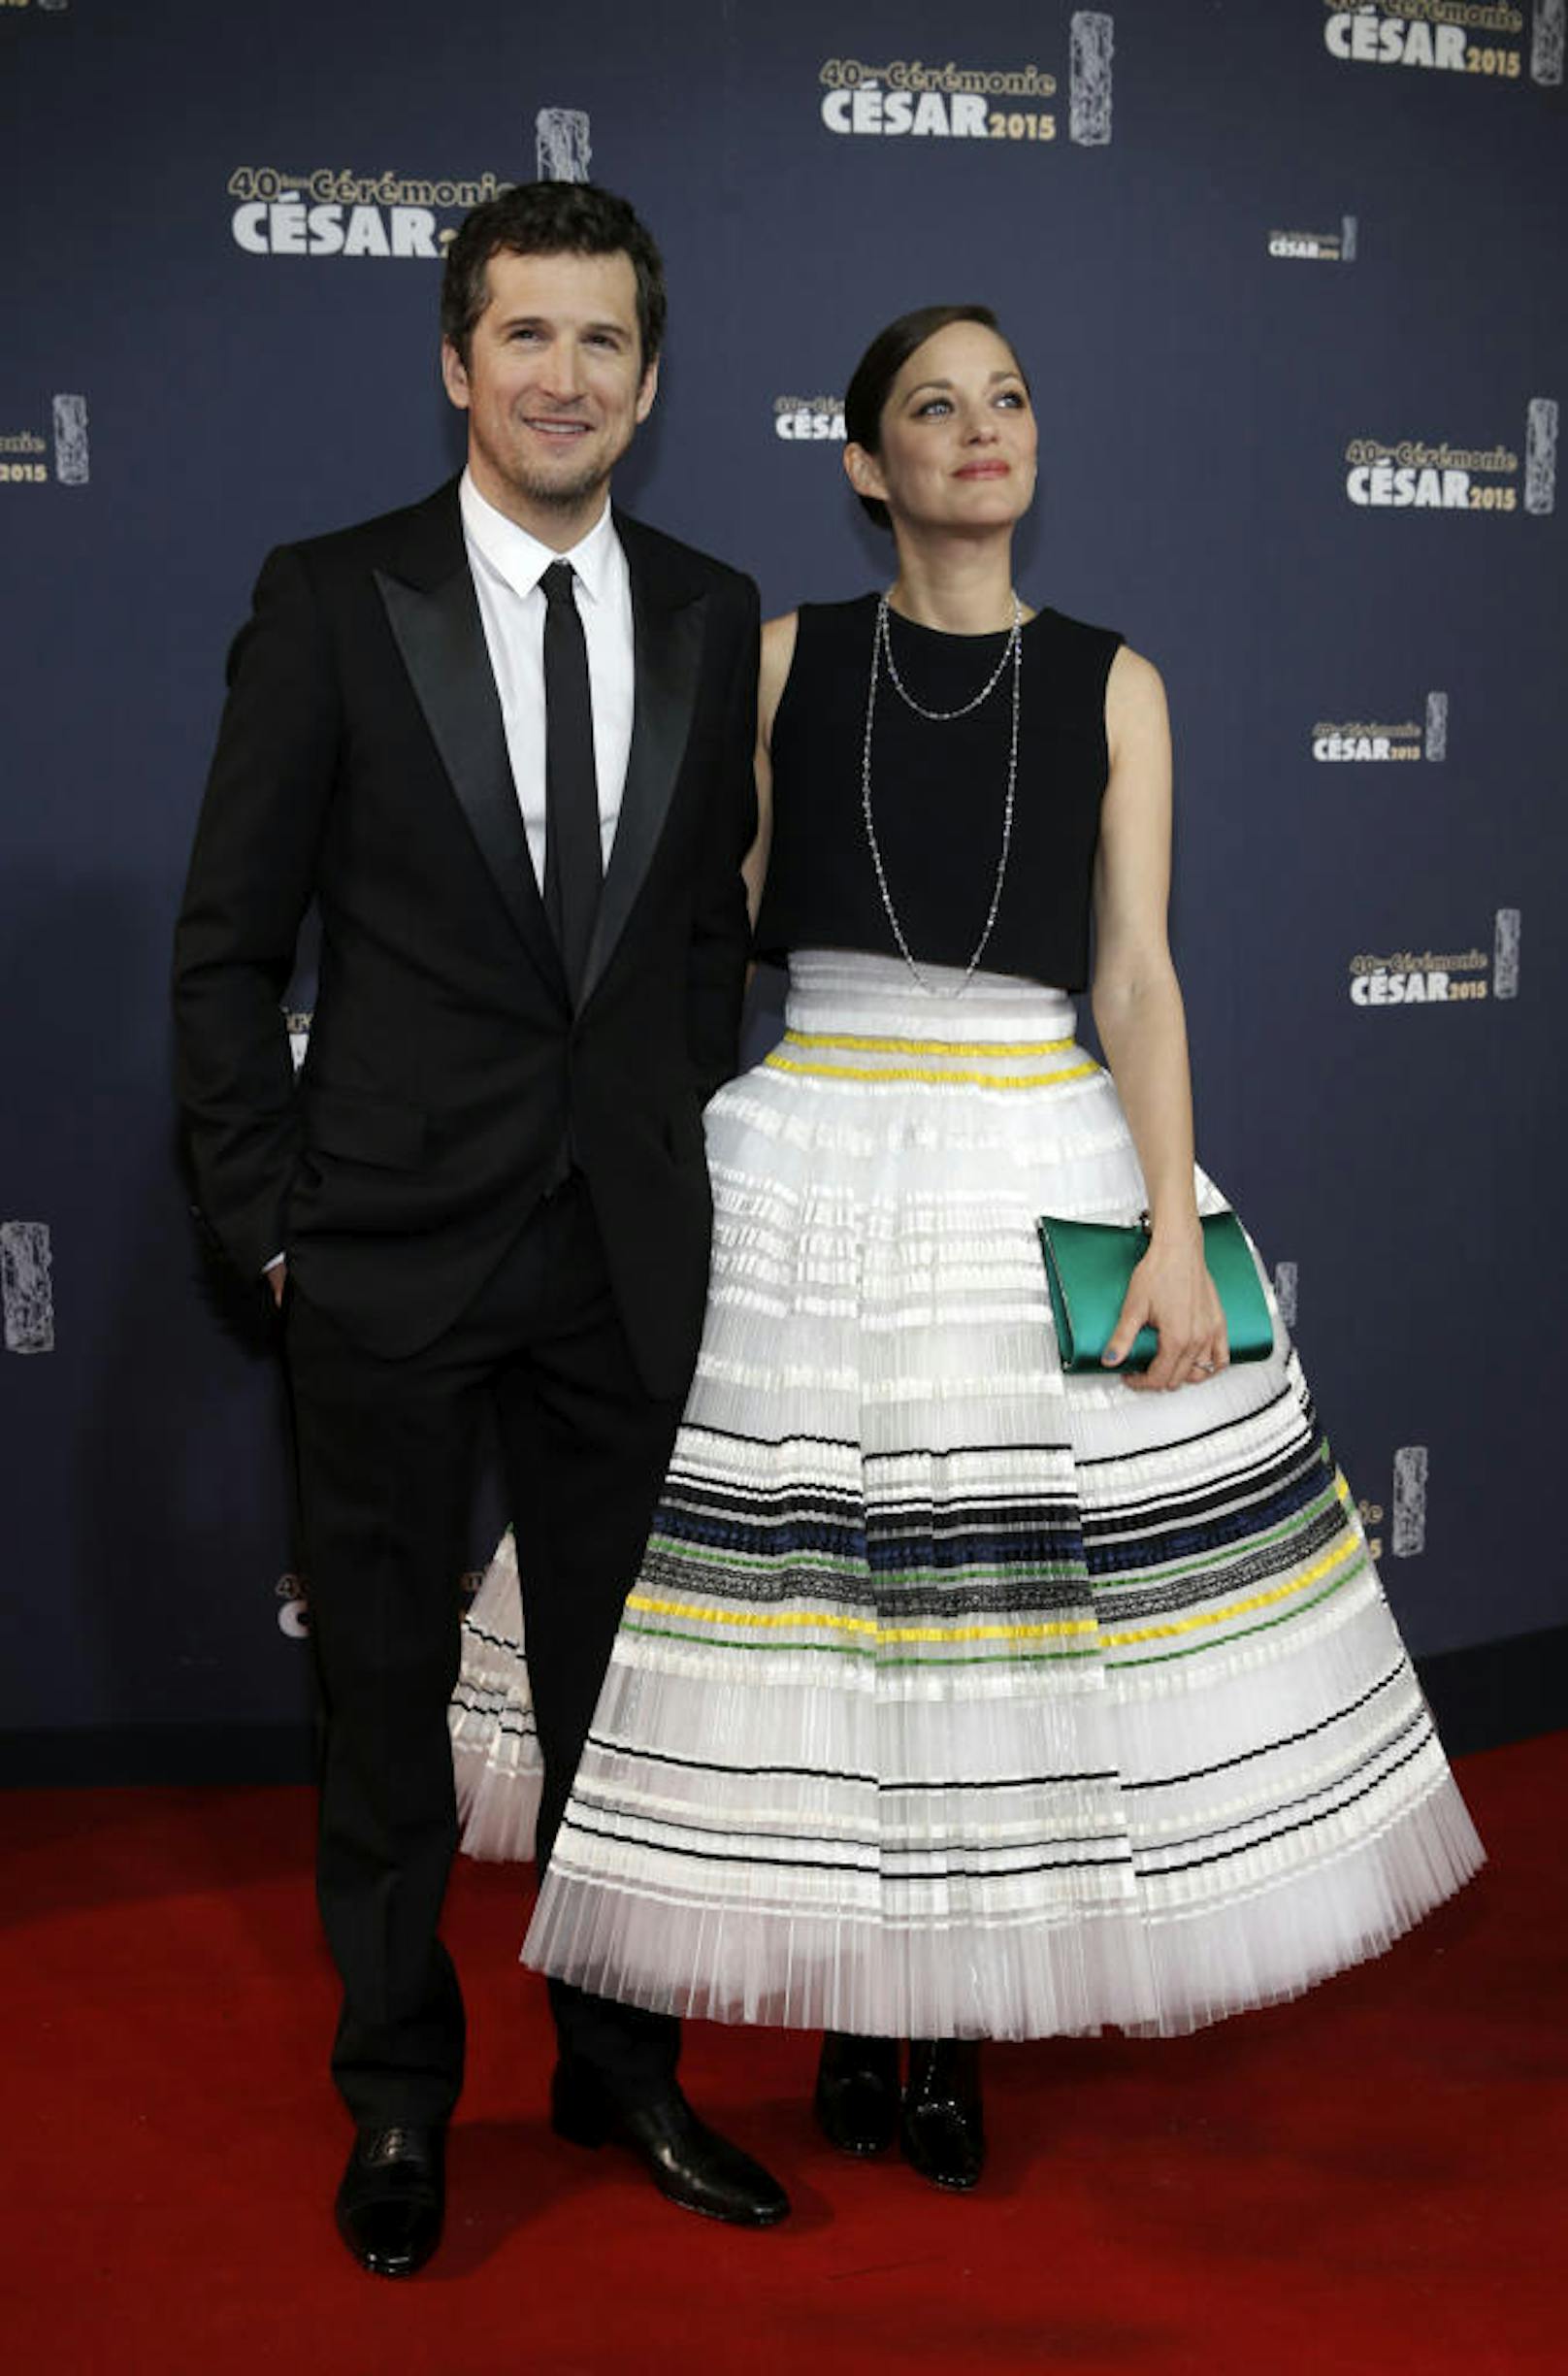 Actress Marion Cotillard (R) and actor Guillaume Canet pose as they arrive at the 40th Cesar Awards ceremony in Paris February 20, 2015.              REUTERS/Christian Hartmann (FRANCE  - Tags: ENTERTAINMENT)   - RTR4QGWF